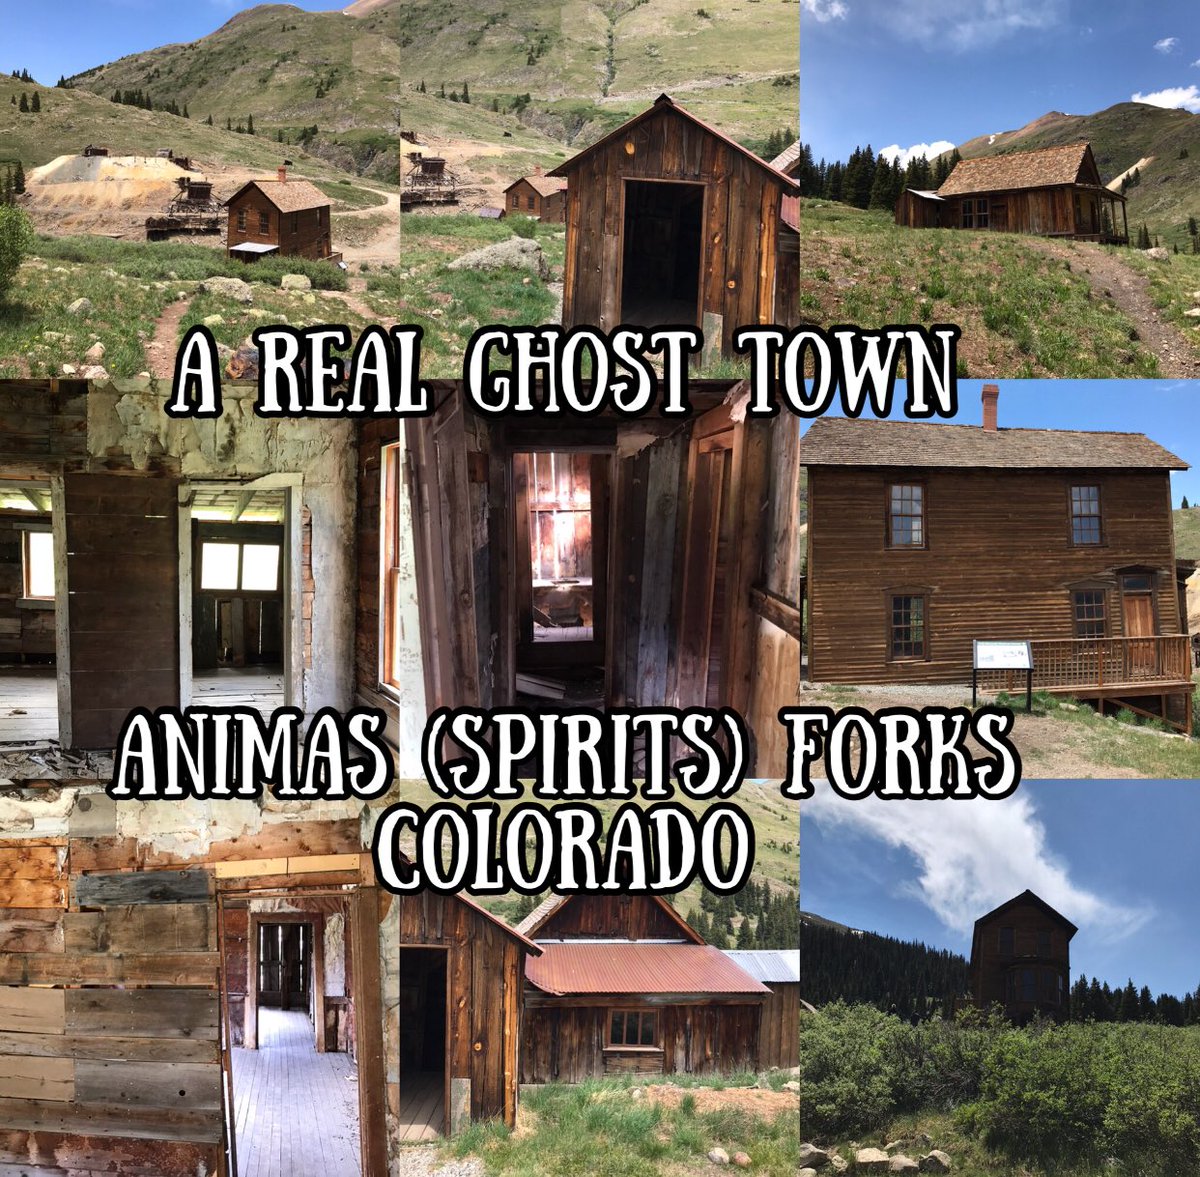 Tweet 2: 
DO YOU LIKE REAL #Ghosts? WE DROVE OVER A 13,000 ft PEAK TO GET TO THIS #GhostTown! 👻#AnimasForks #Colorado (Animas literally means #Spirits! Founded 1873 as a mining ⛏ town! 
#Horror #Paranormal #Ghost